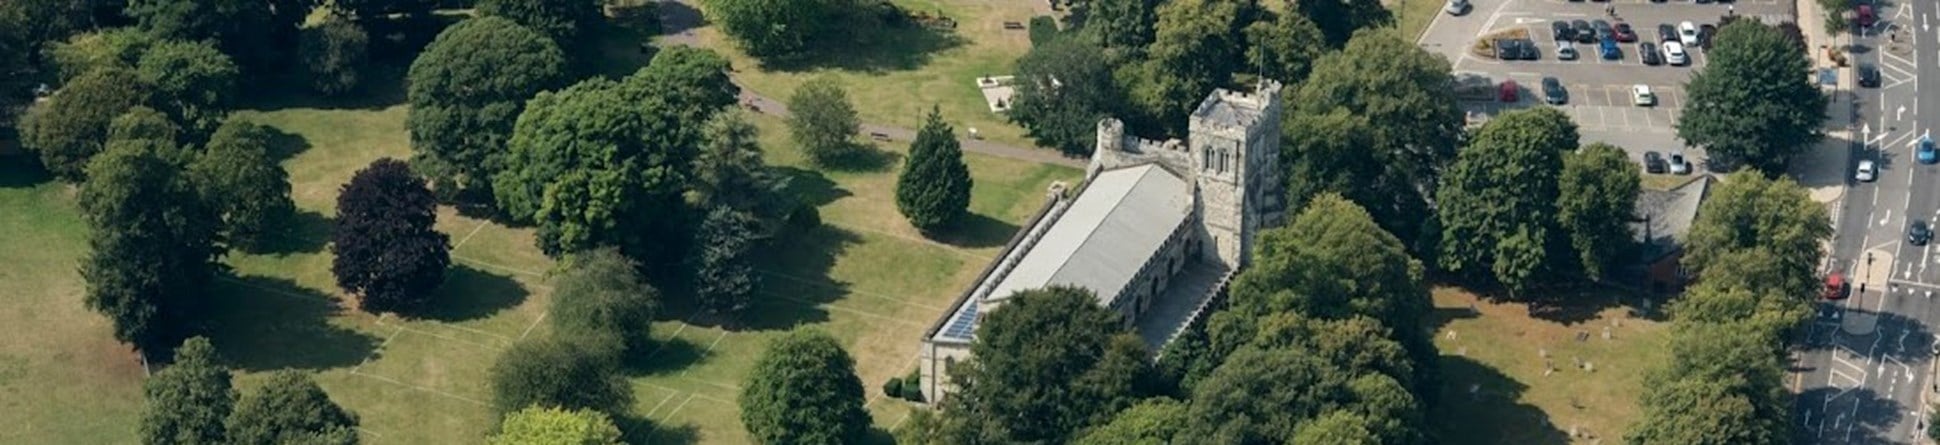 The Priory Church of St Peter is shown in an aerial view, surrounded by trees and with the landscaped Priory grounds around it.